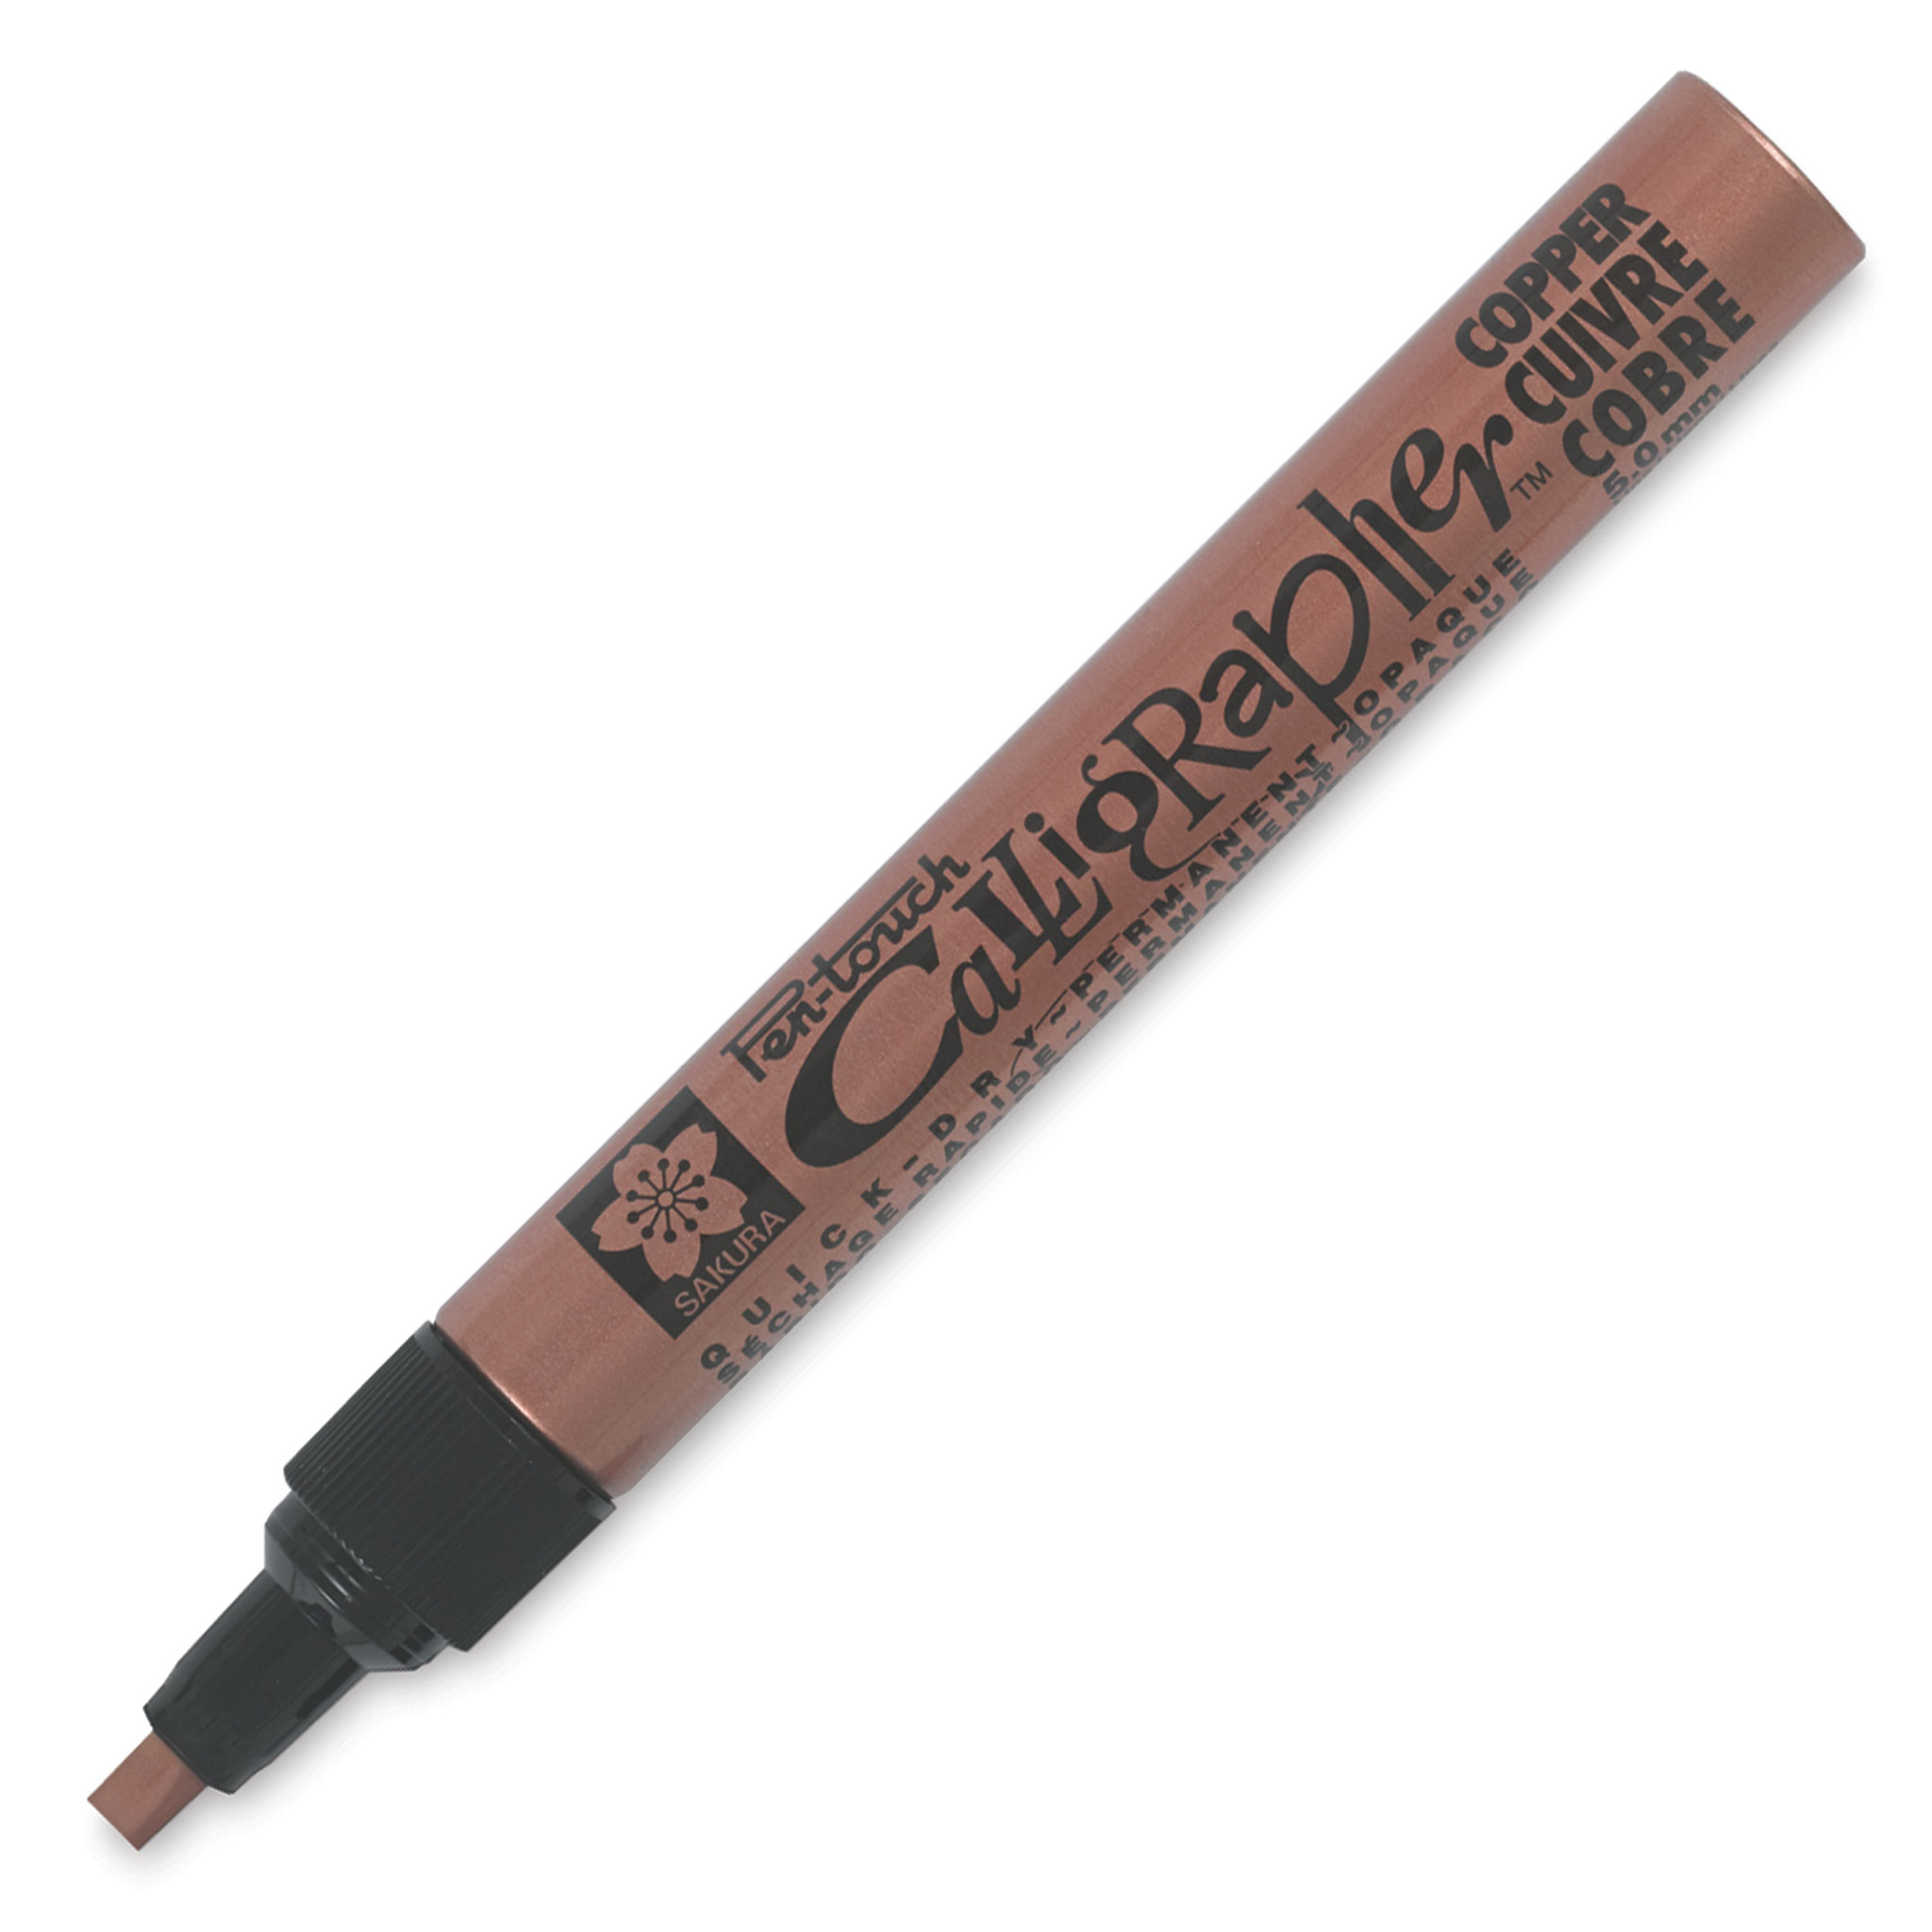 PEN-TOUCH CALLIGRAPHER｜SAKURA COLOR PRODUCTS CORP.